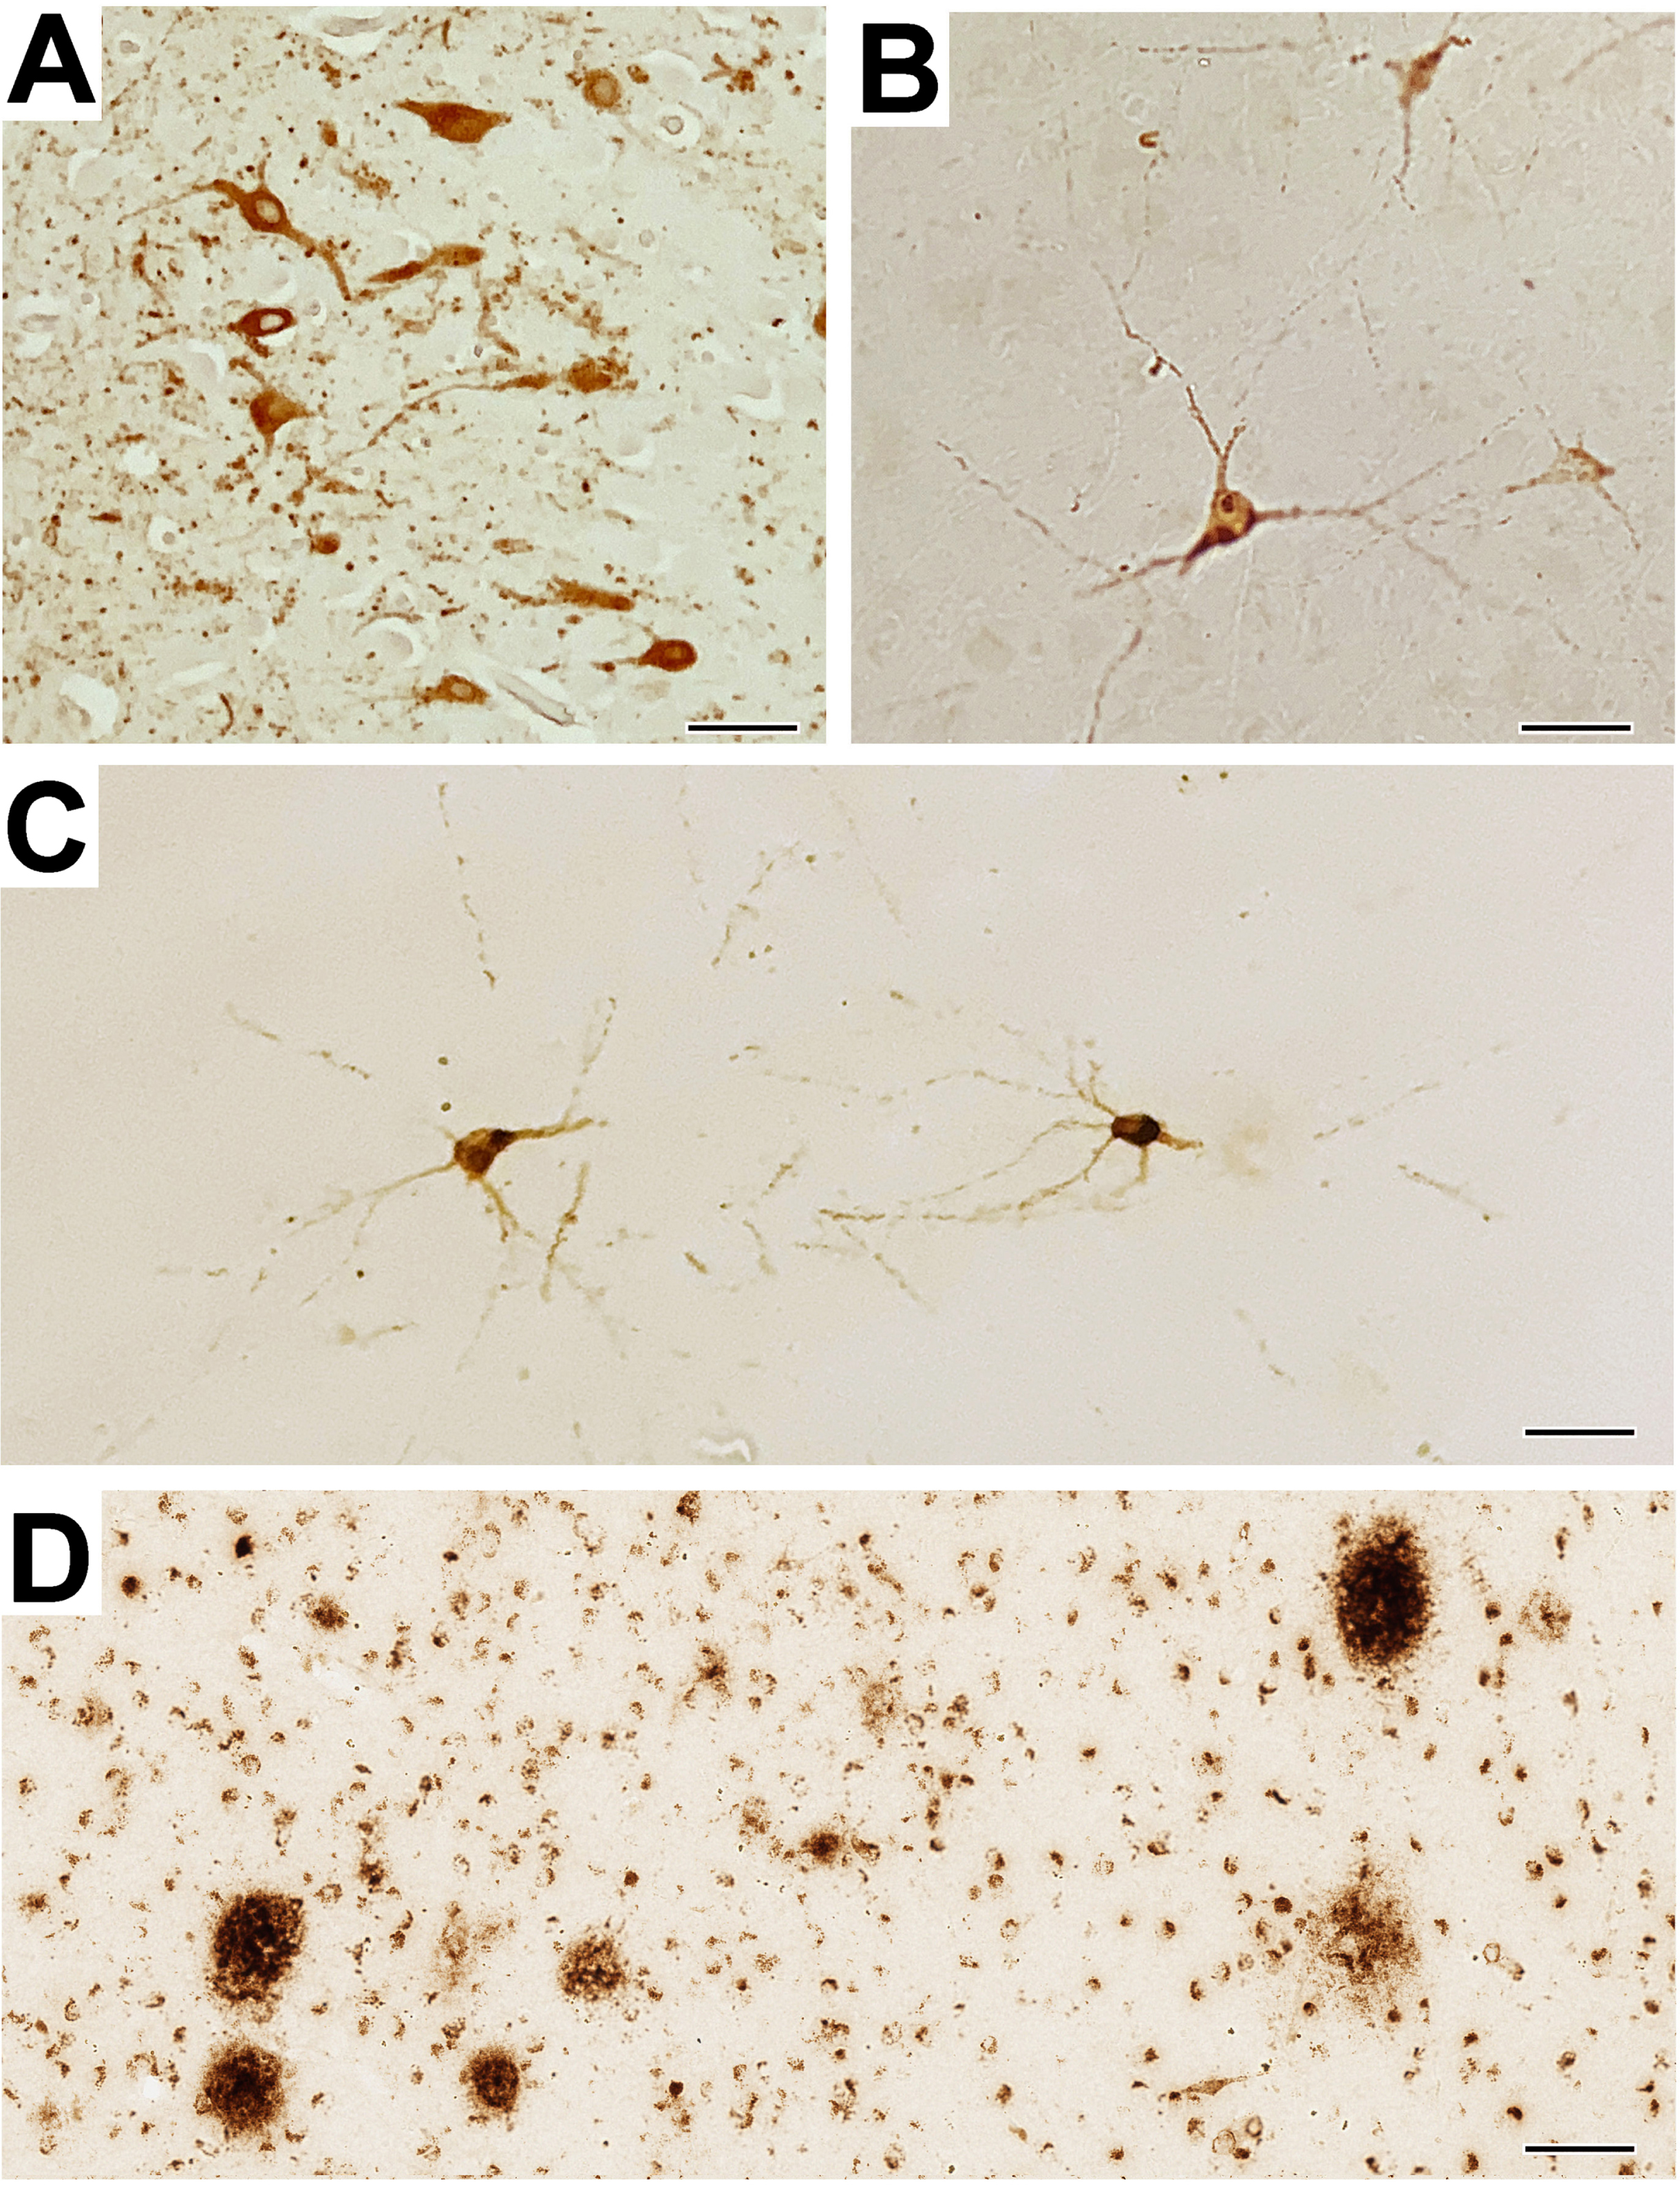 Intraneuronal pTau expression in humans and nonhuman primates. A) Representative immuno-positive pTau staining in the amygdala of a control AD patient, and B) a control very old (29 years) female Japanese macaque. C) Representative pTau neuronal staining in the sole experimental rhesus macaque (a 23-year-old ovariectomized female), showing positive staining of a neuron in a pre-tangle state; none of the other 37 animals showed any positive pTau staining in the amygdala. D) Extensive staining of extracellular Aβ plaques in the amygdala of the same 23-year-old ovariectomized female. In summary, pTau pathology in the rhesus macaques was rare and did not approach the severity of that observed in human AD. Scale bars = 50μm for panels A-C, and 100μm for panel D.